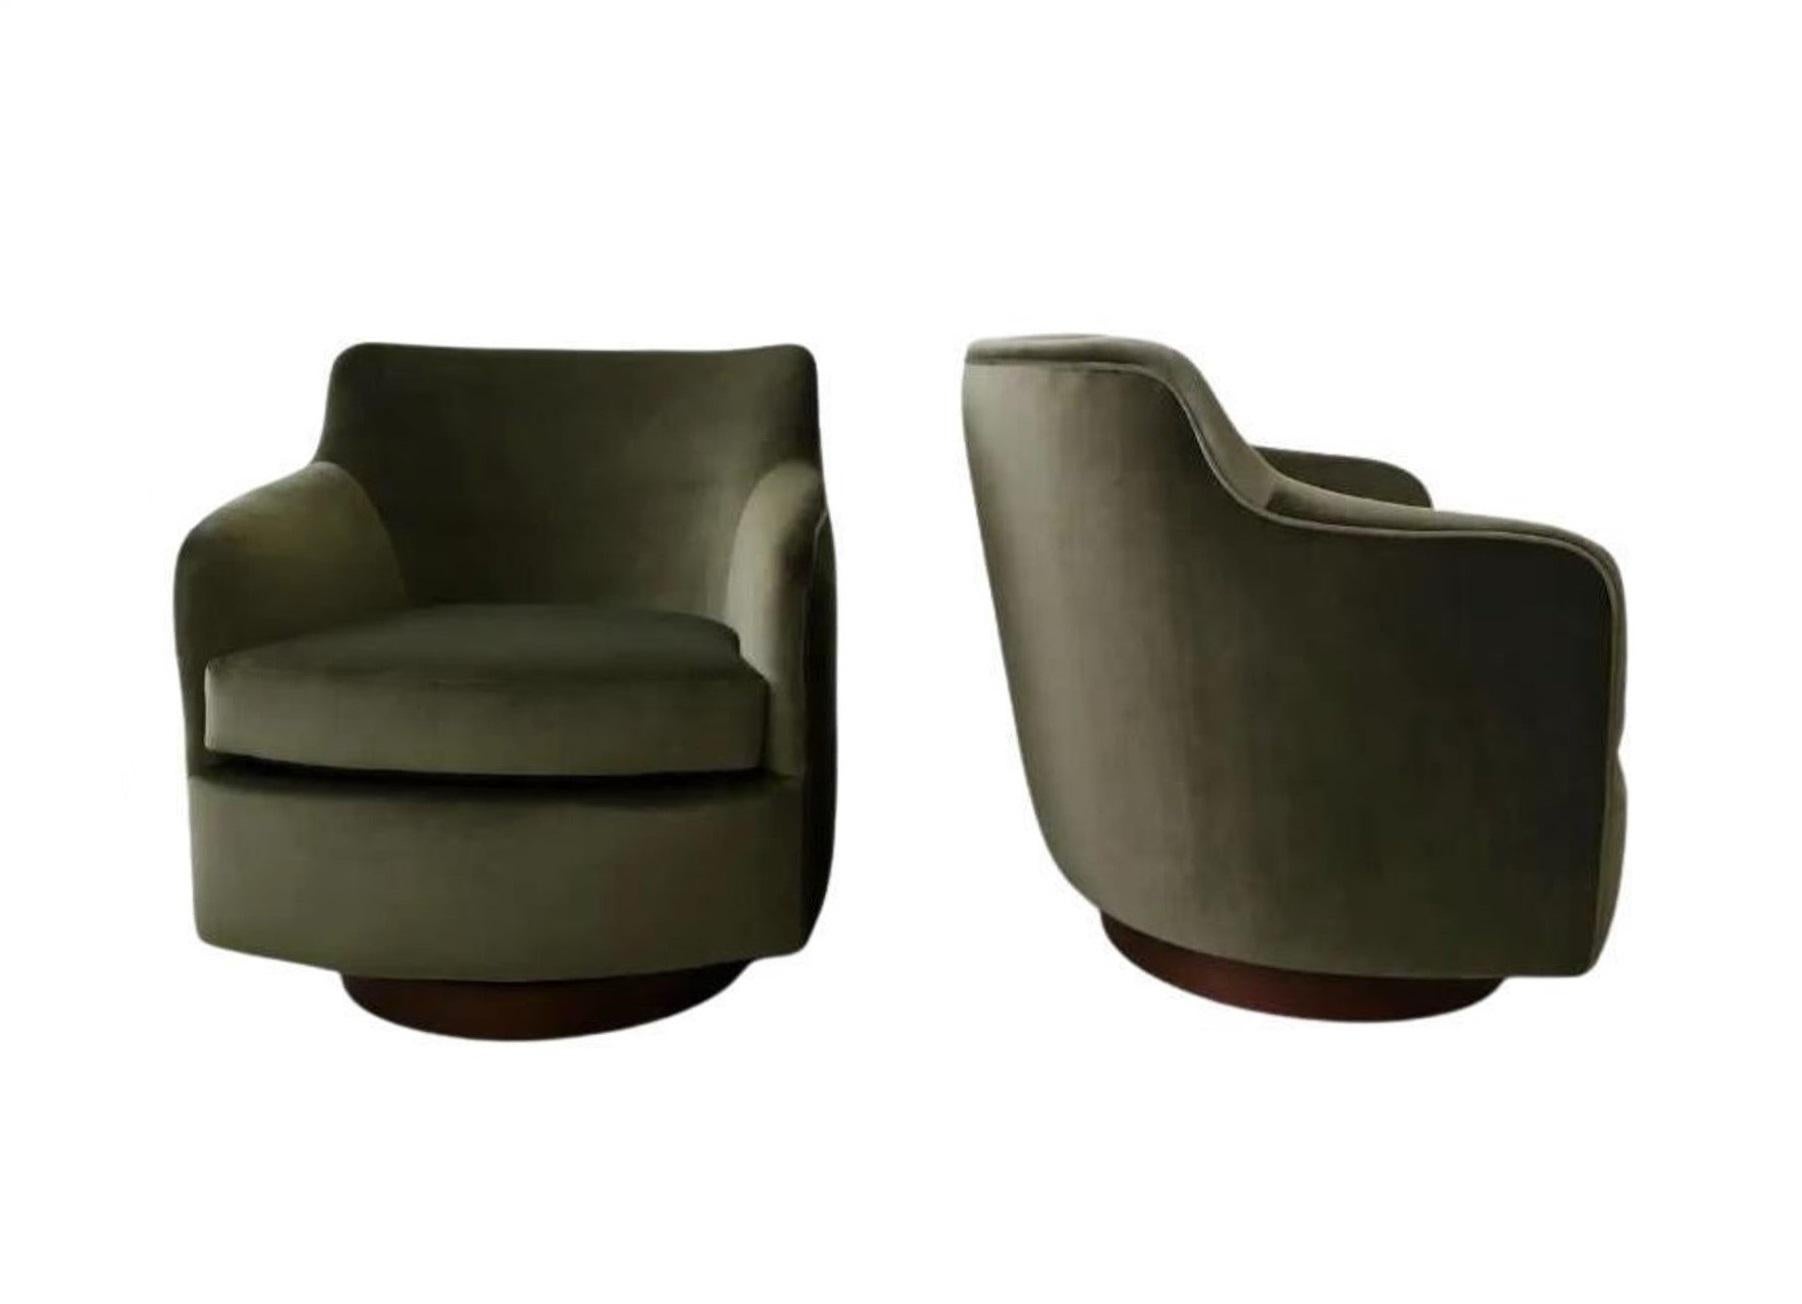 American Set of Two Milo Baughman Swivel Base Lounge Chairs For Sale